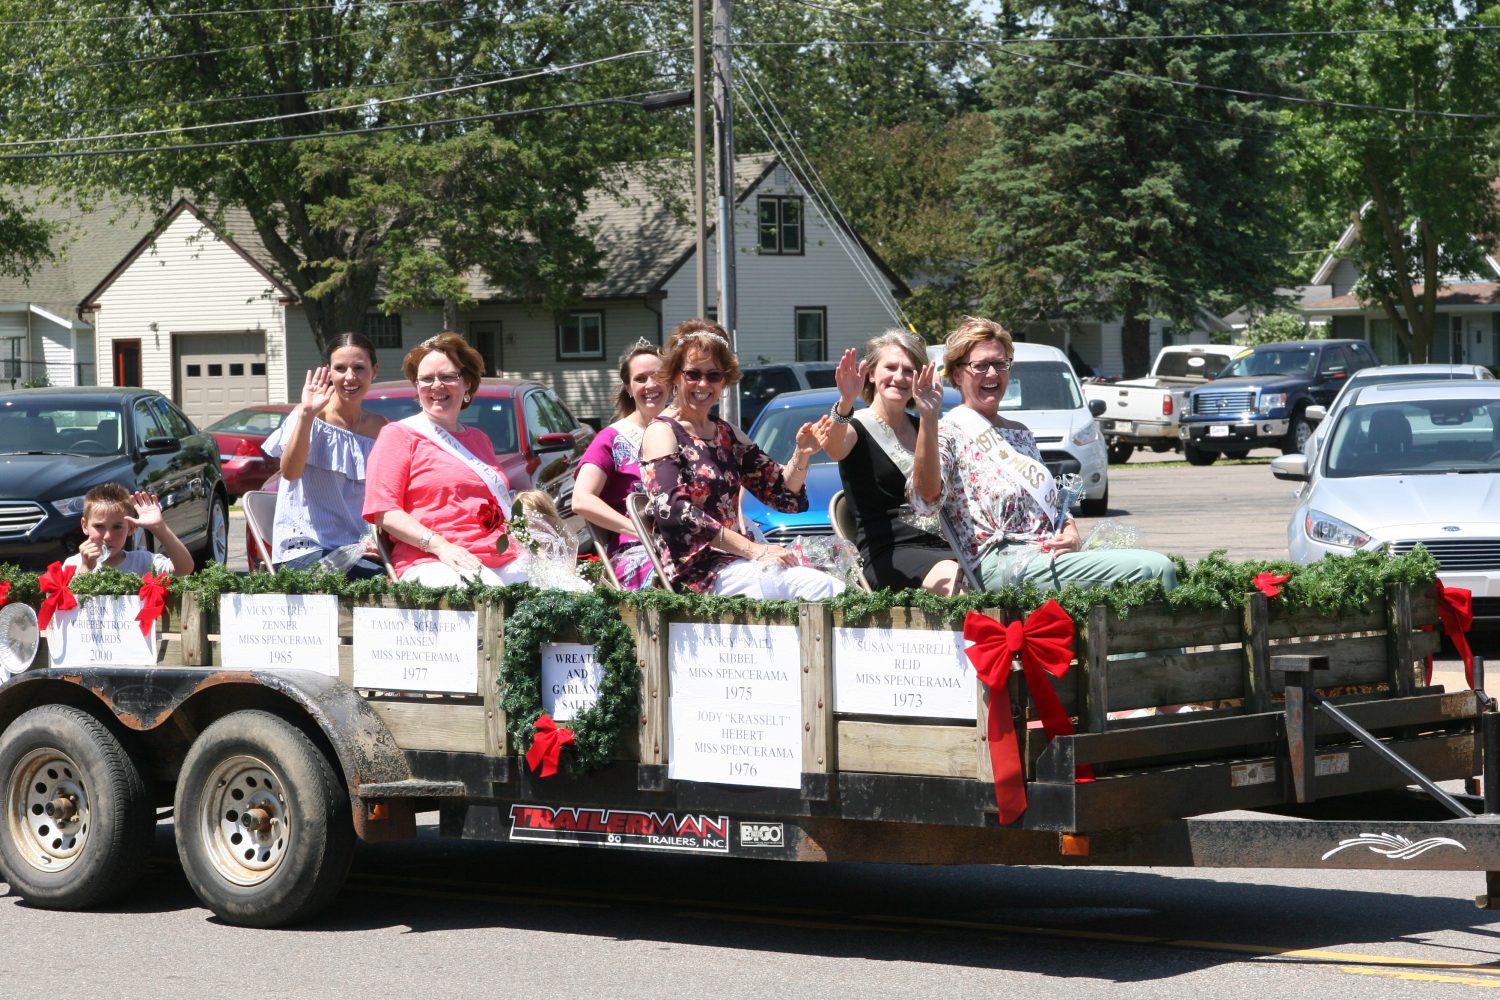 The parade featured six former Miss Spencerama winners.